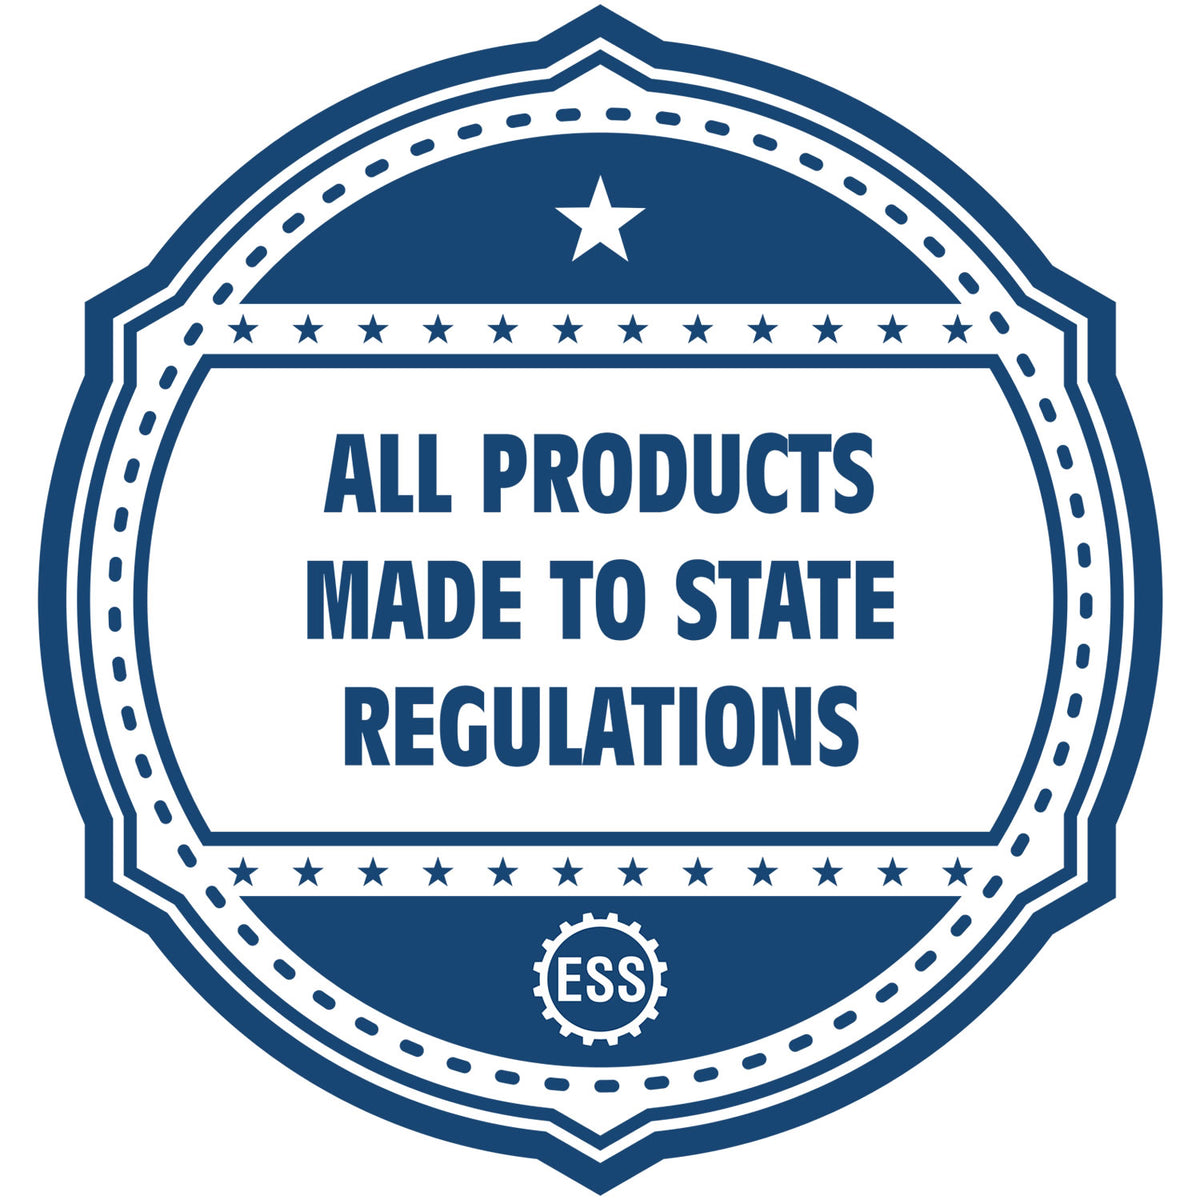 An icon or badge element for the Digital Delaware Landscape Architect Stamp showing that this product is made in compliance with state regulations.